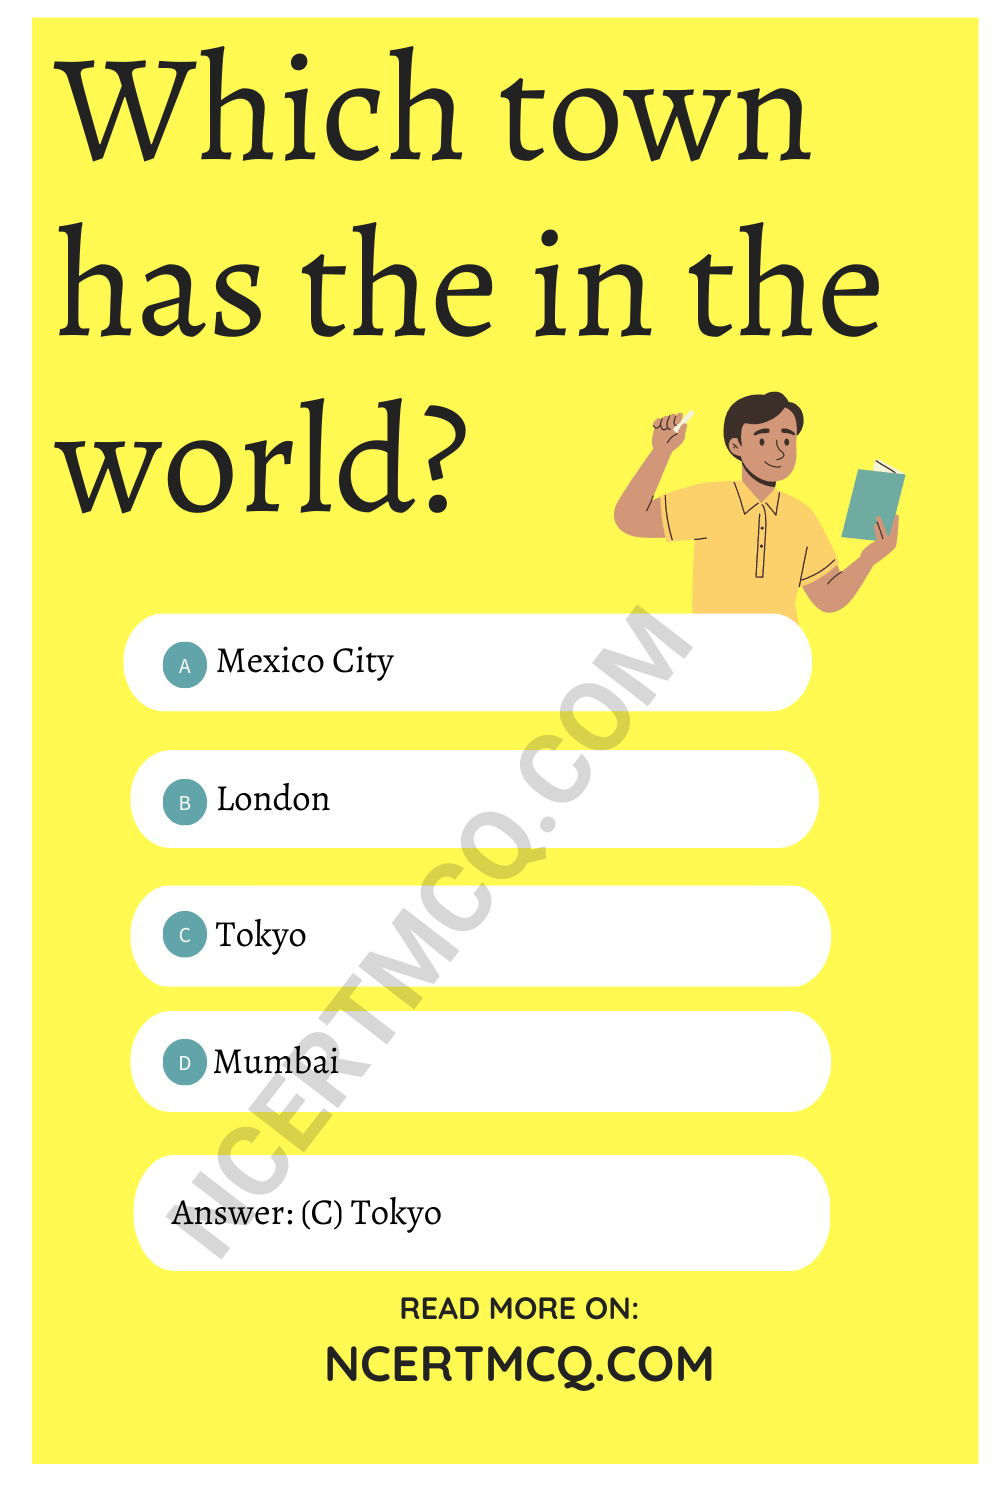 Which town has the in the world?